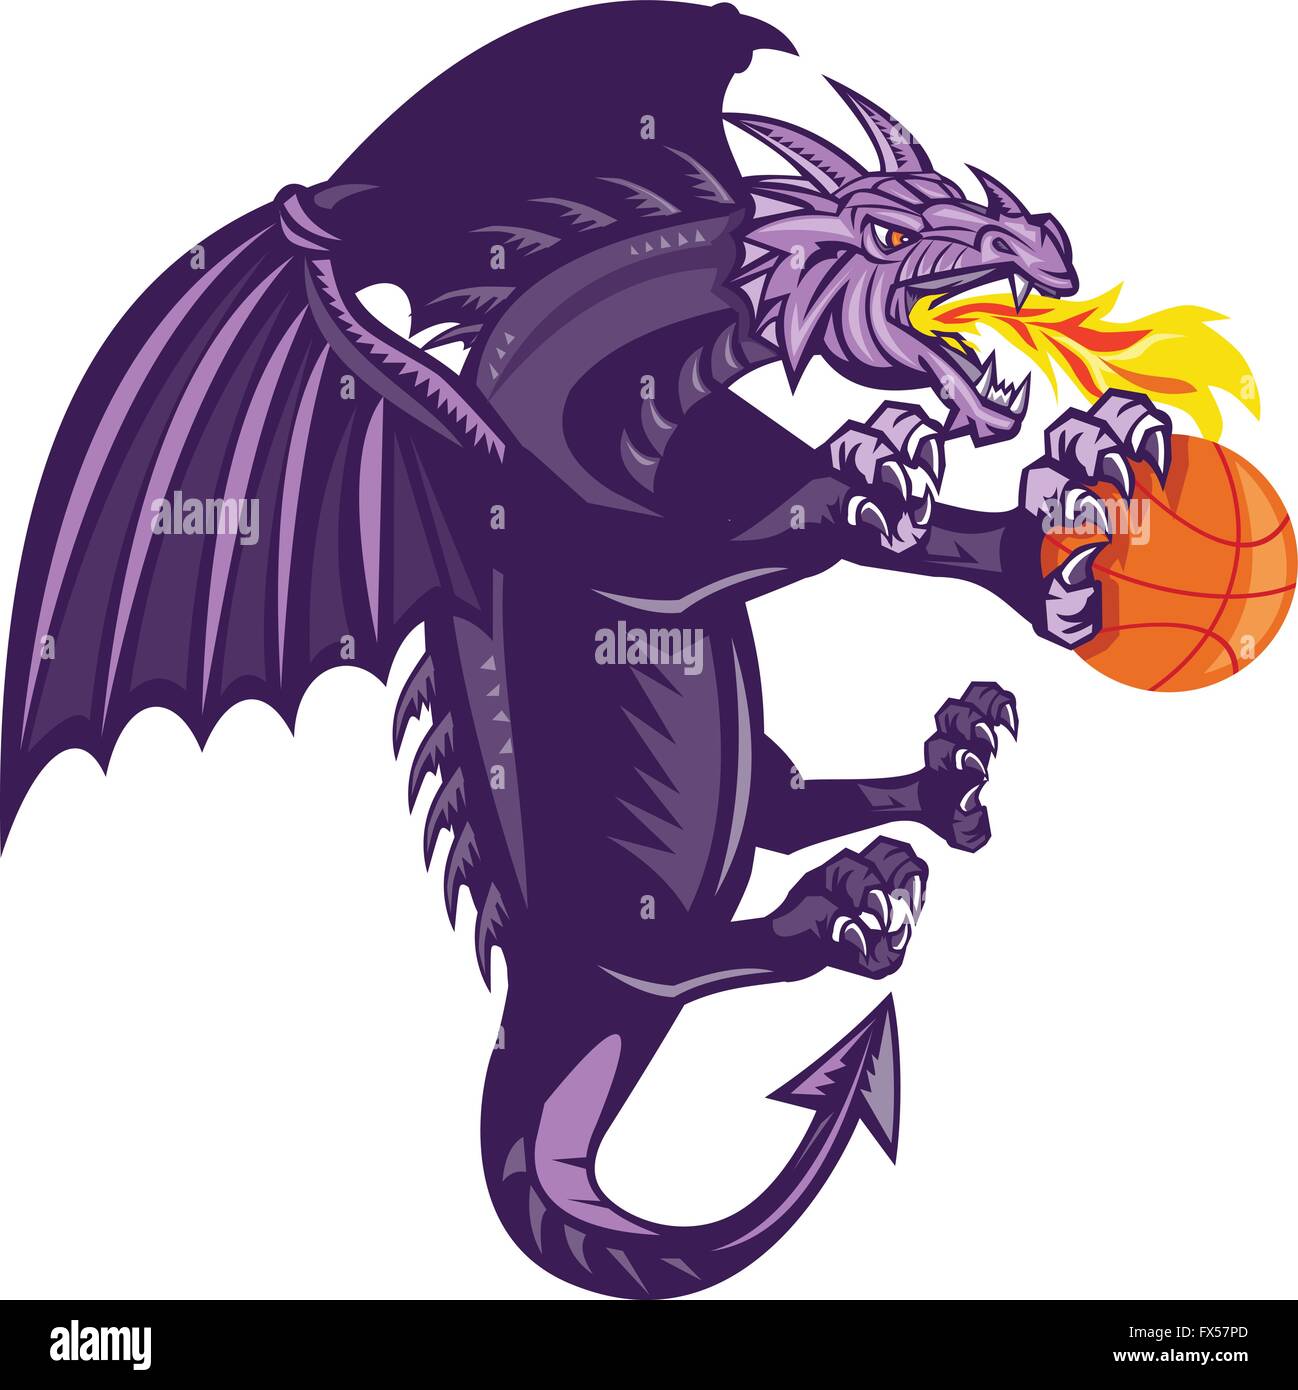 Illustration of a purple dragon breathing fire clutching holding an orange basketball viewed from the side set on isolated white background done in retro style. Stock Vector